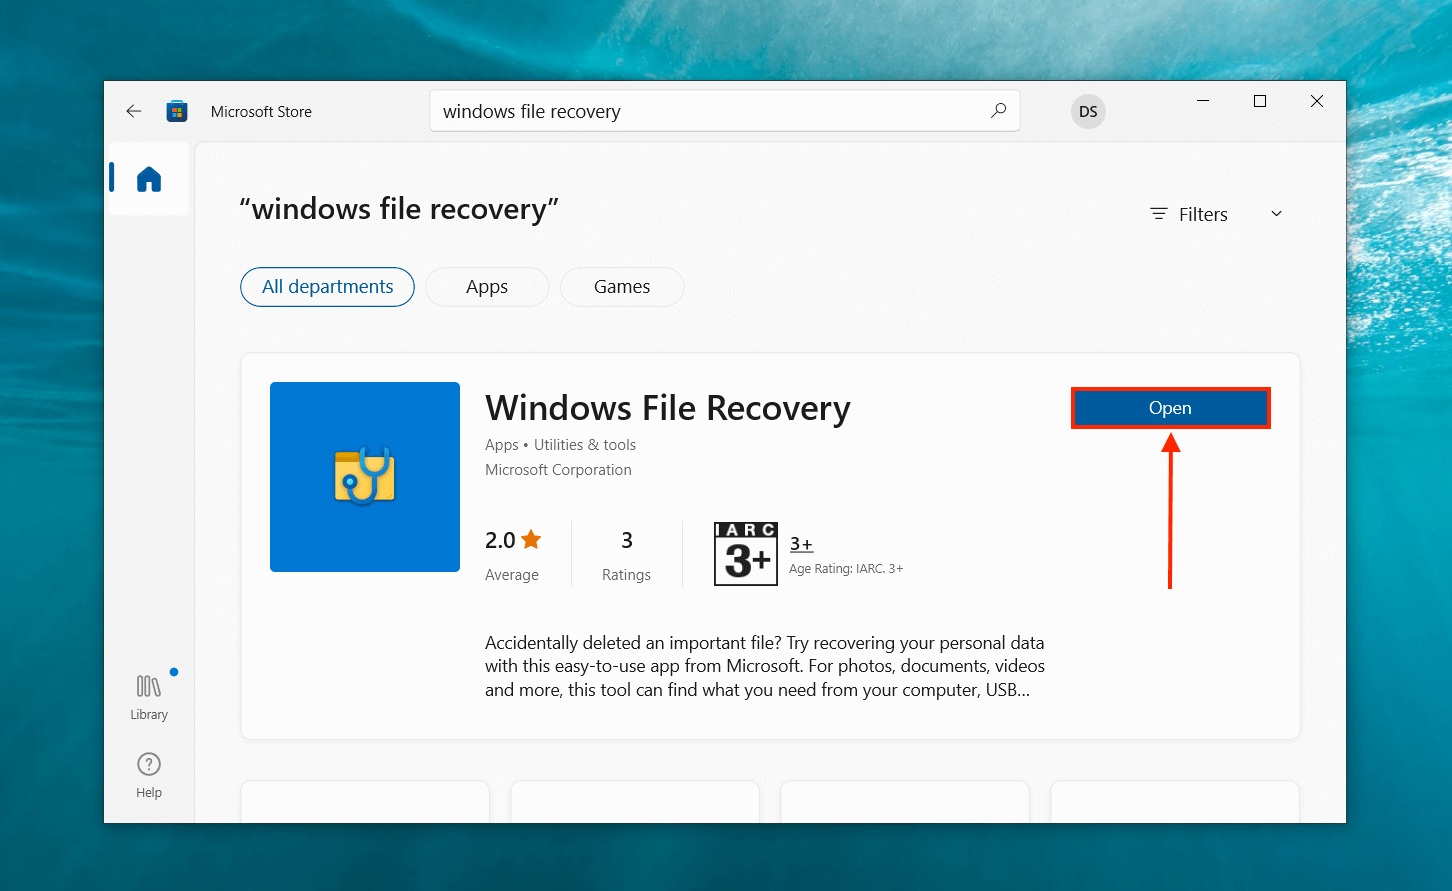 Windows File Recovery in the Microsoft Store